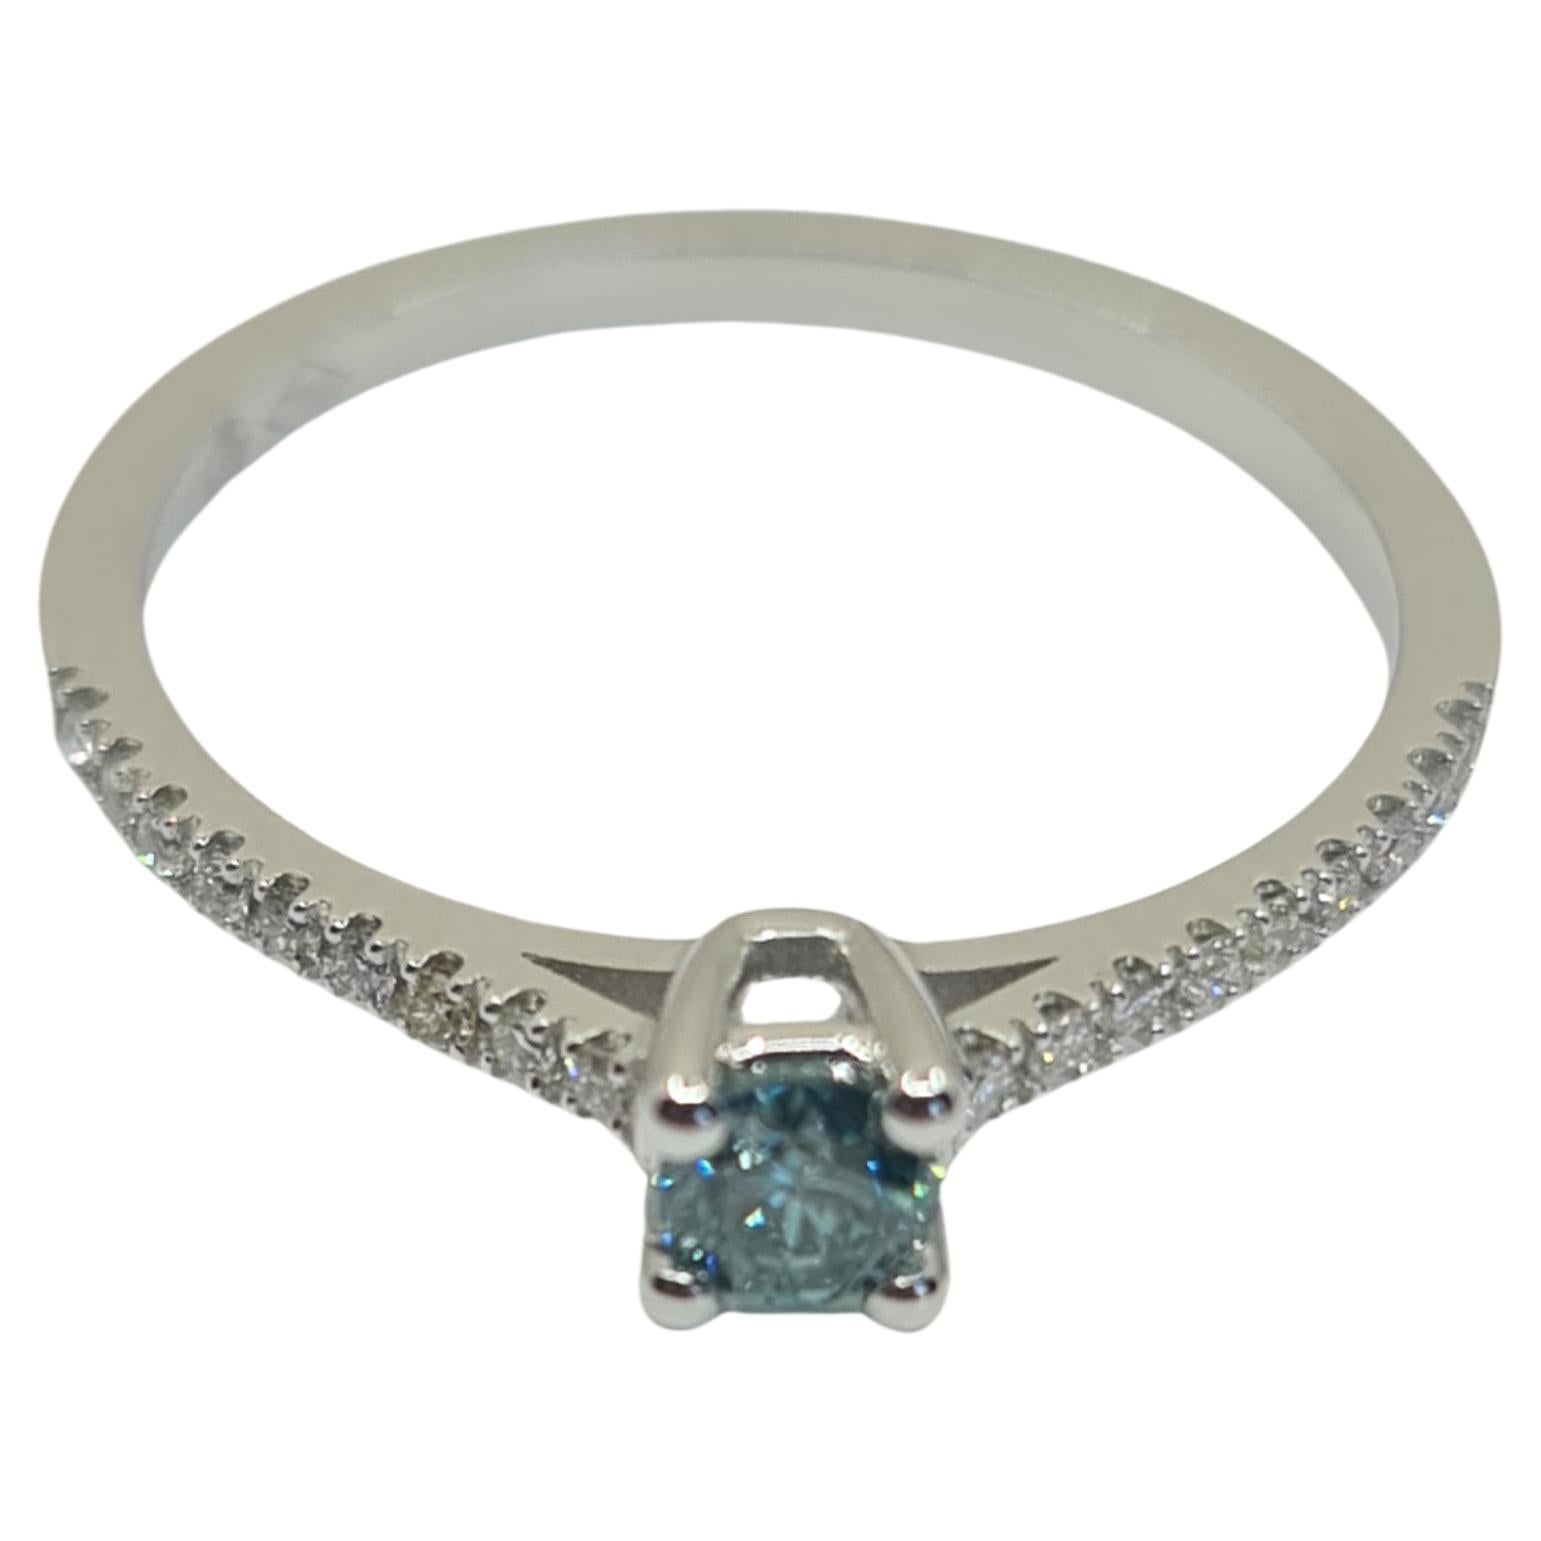 Exquisite GIA Certified Solitaire Diamond Ring 0.18 Carat Fancy Deep Blue-Green 